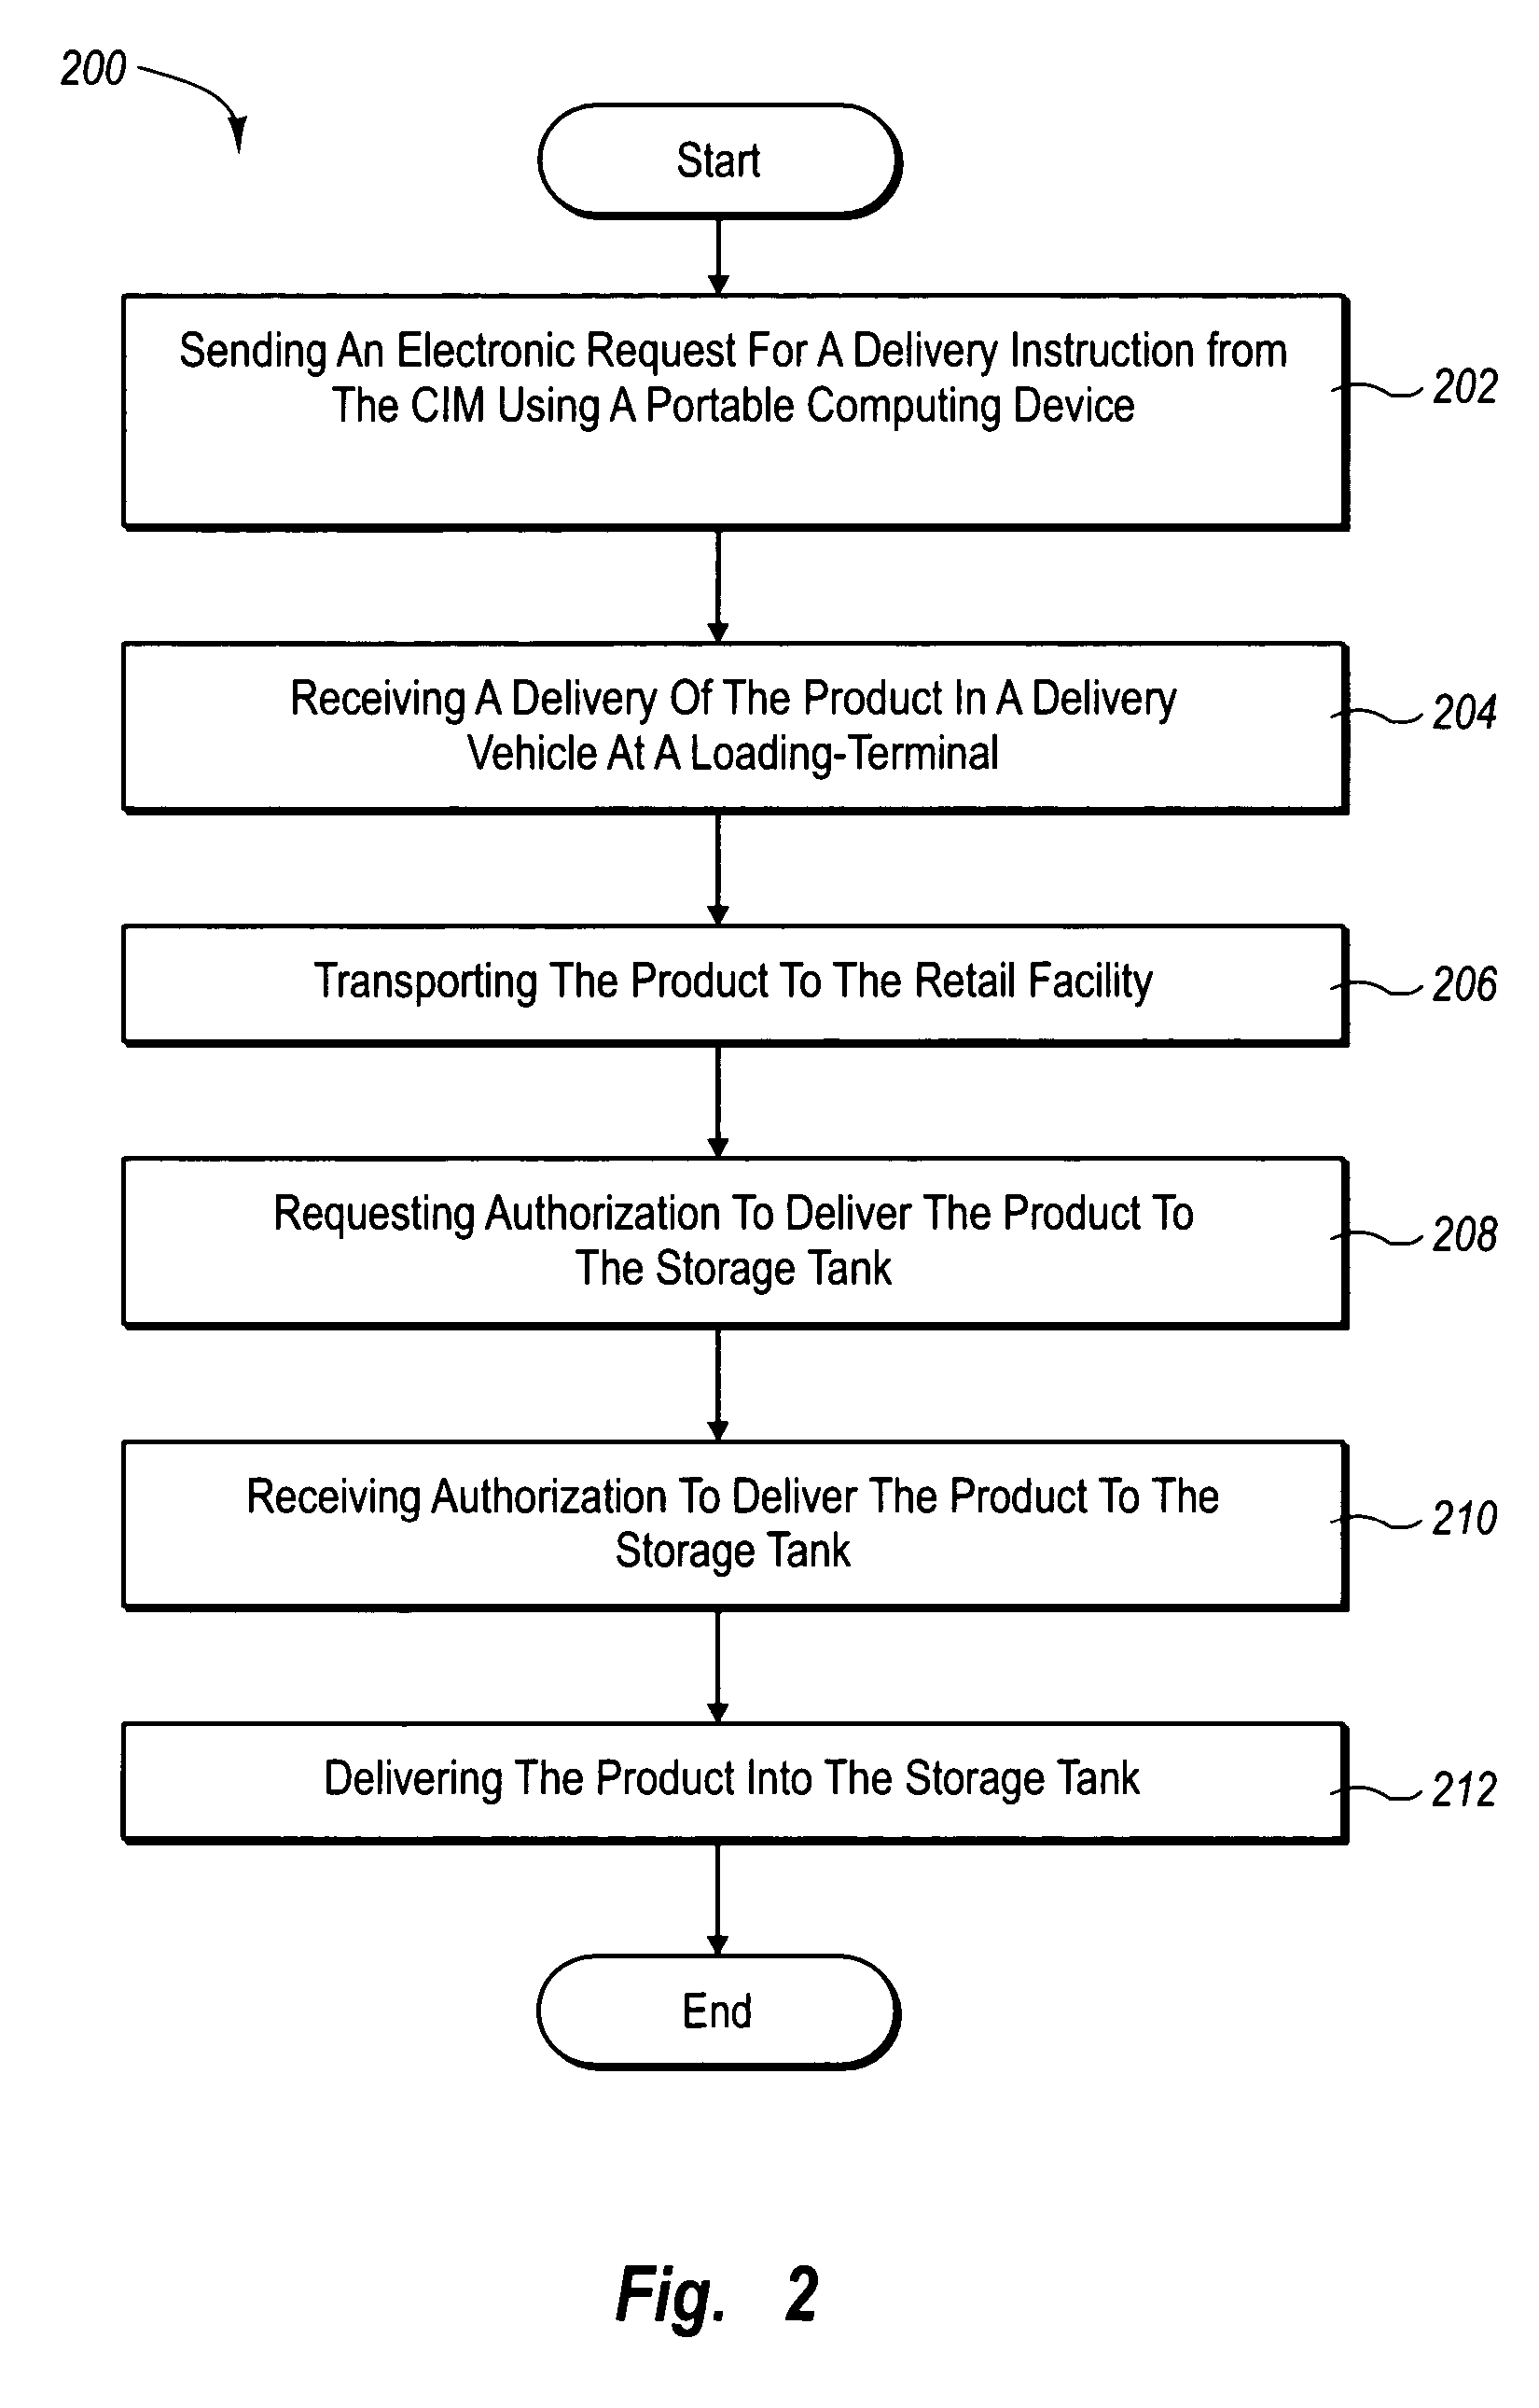 Collecting liquid product volume data at a dispenser